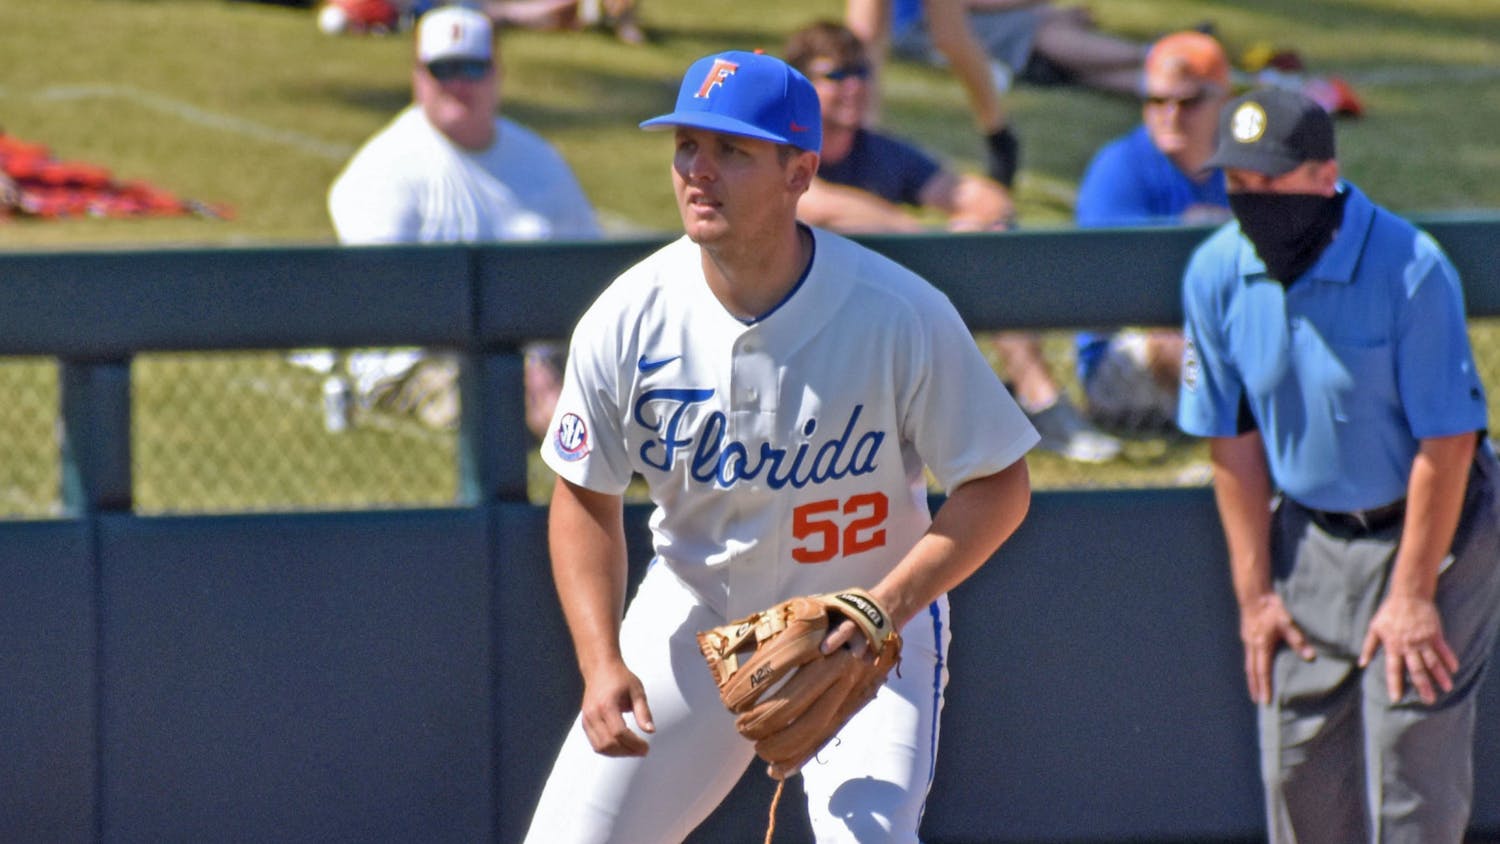 Florida will host Florida A&M Wednesday night, a month after a weekend sweep, as the Gators look for their 20th win of the season. Photo from UF-Jacksonville game March 14.